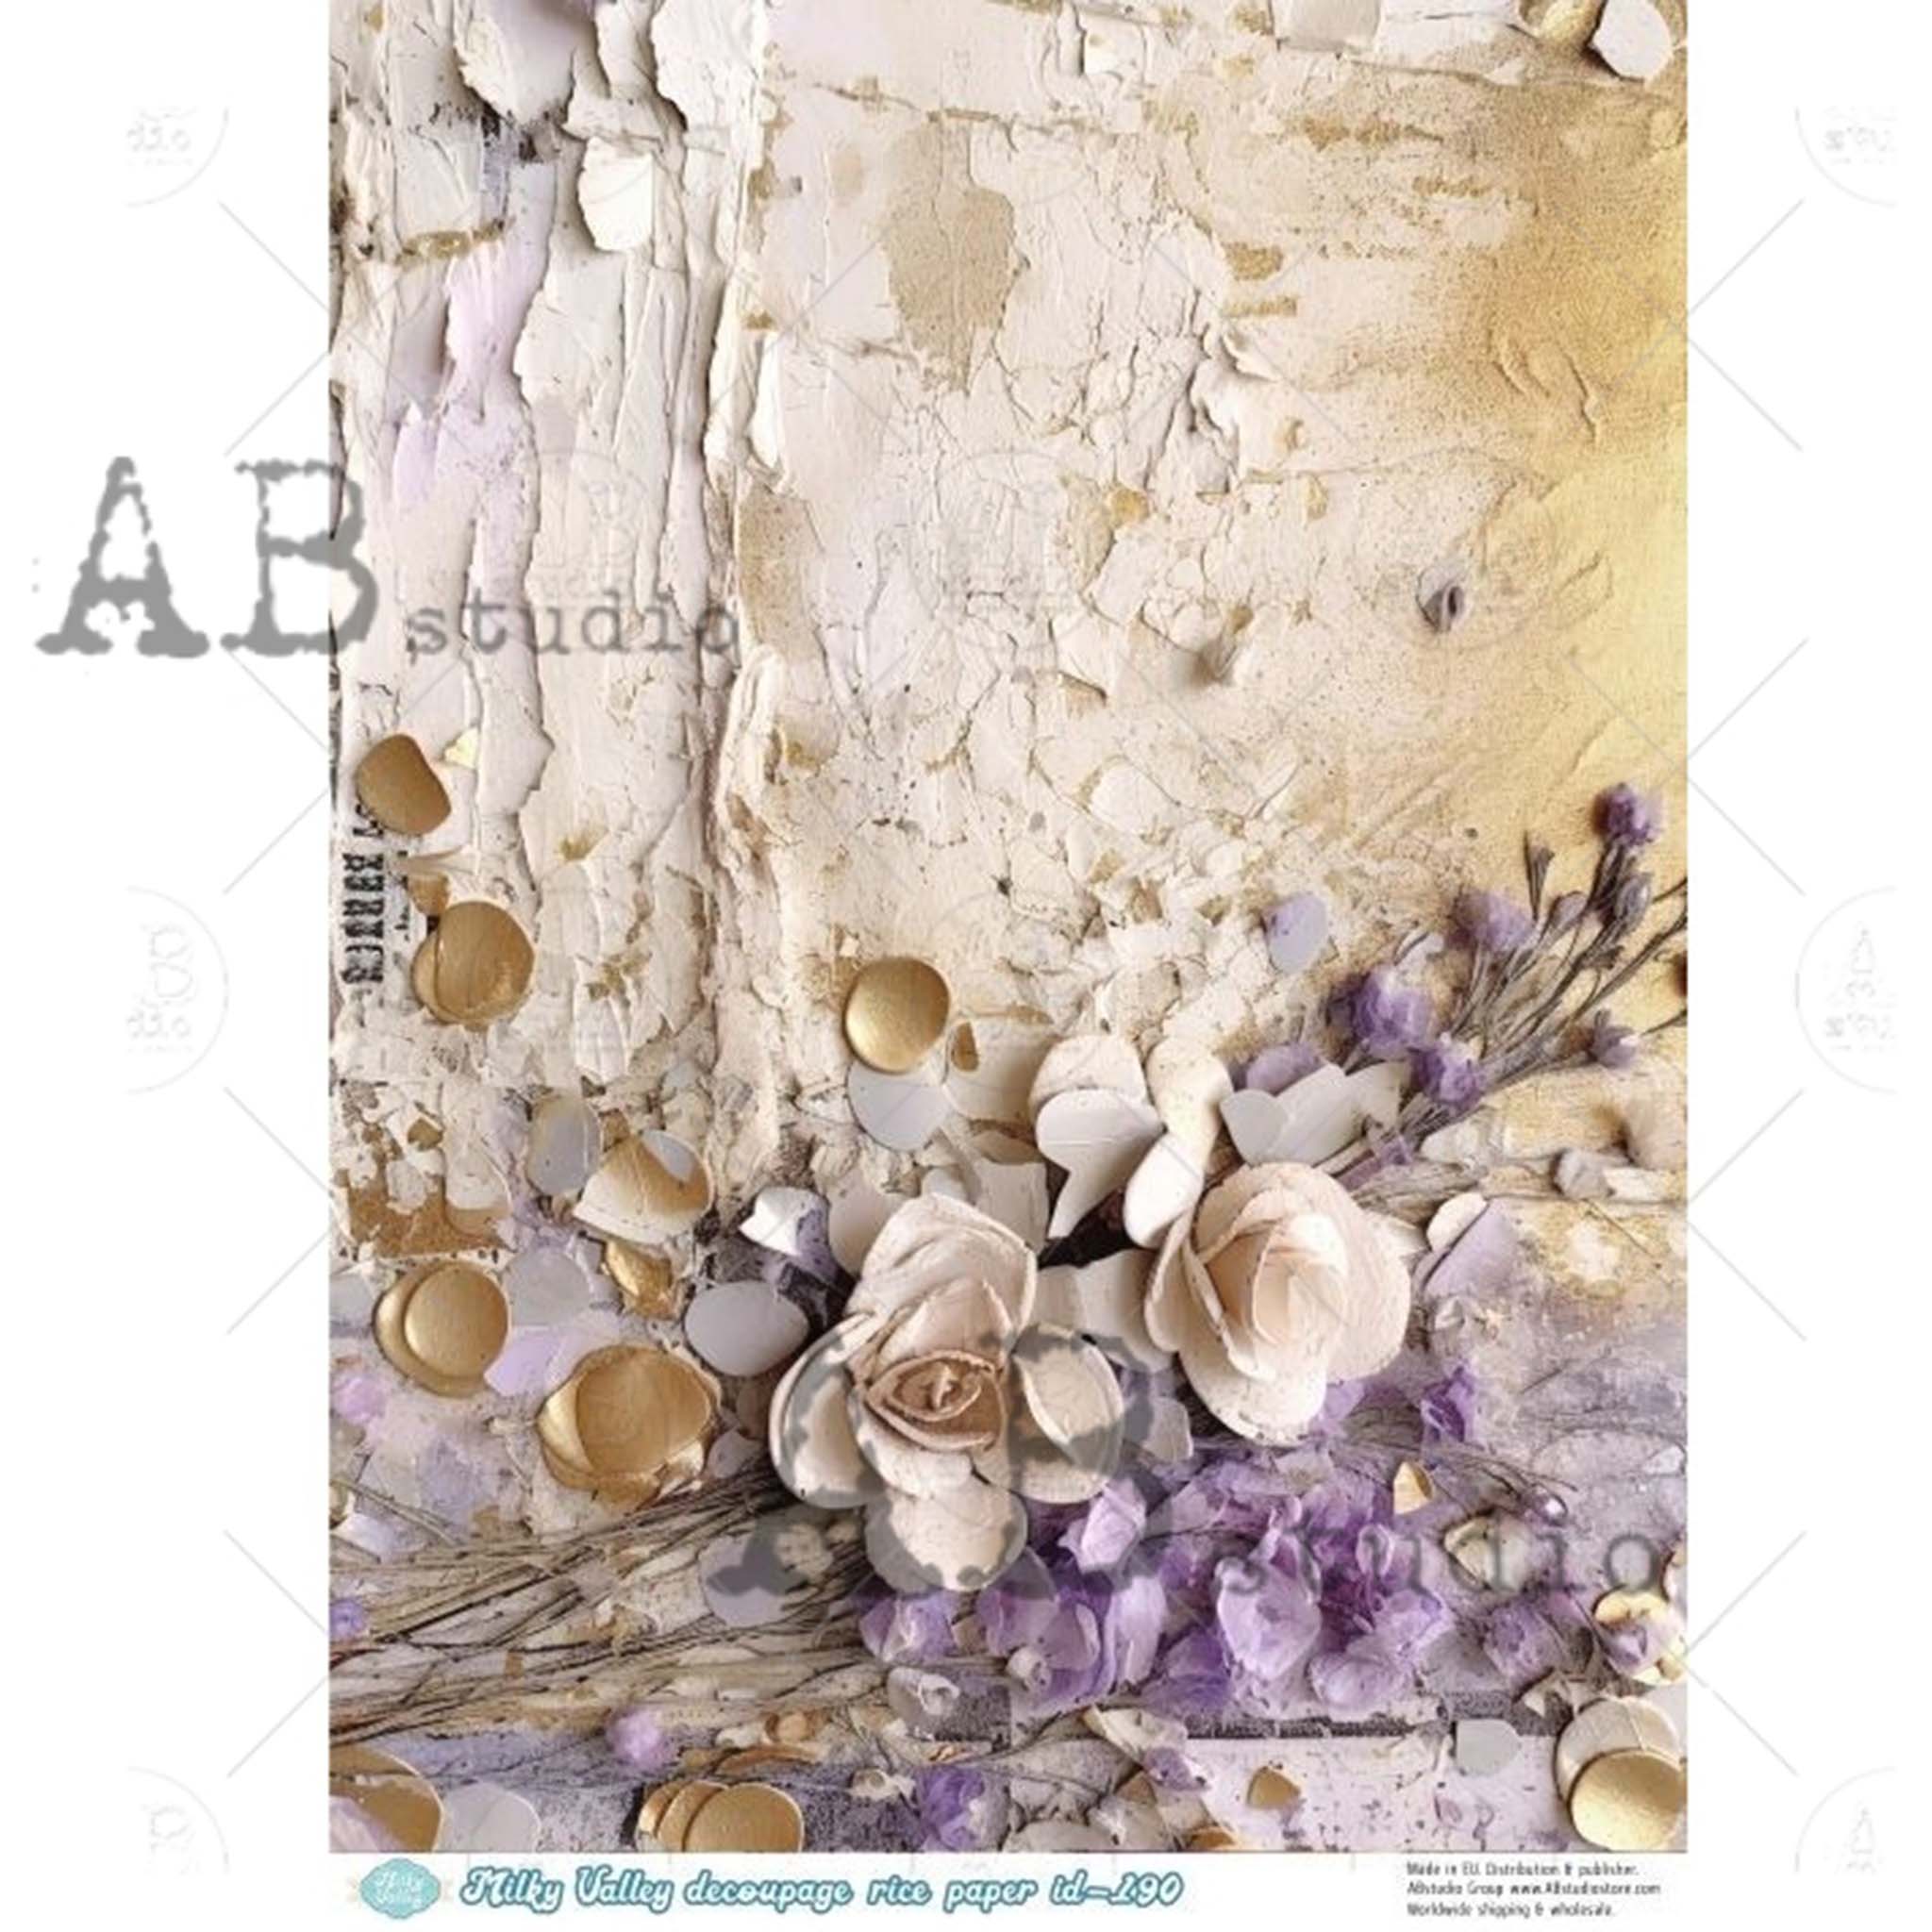 A4 rice paper design featuring delicate lavender and cream flowers resting against a charming white stucco background, accented with shimmering gold drops. White borders are on the sides.